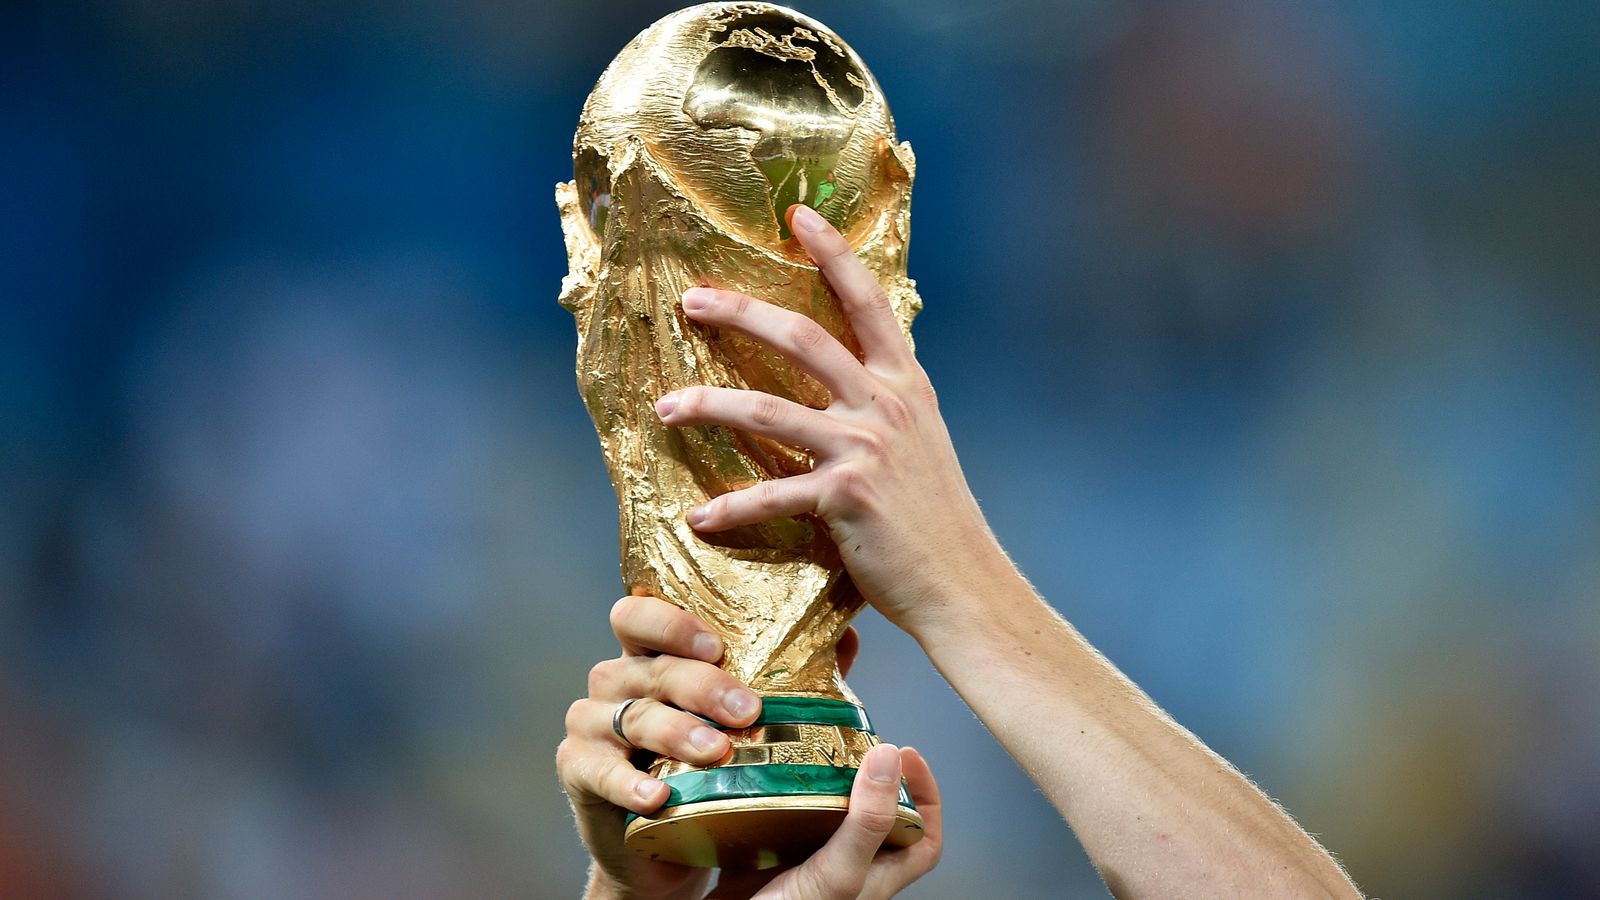 Fifa proposes new mini-World Cup to be held every two years: Report